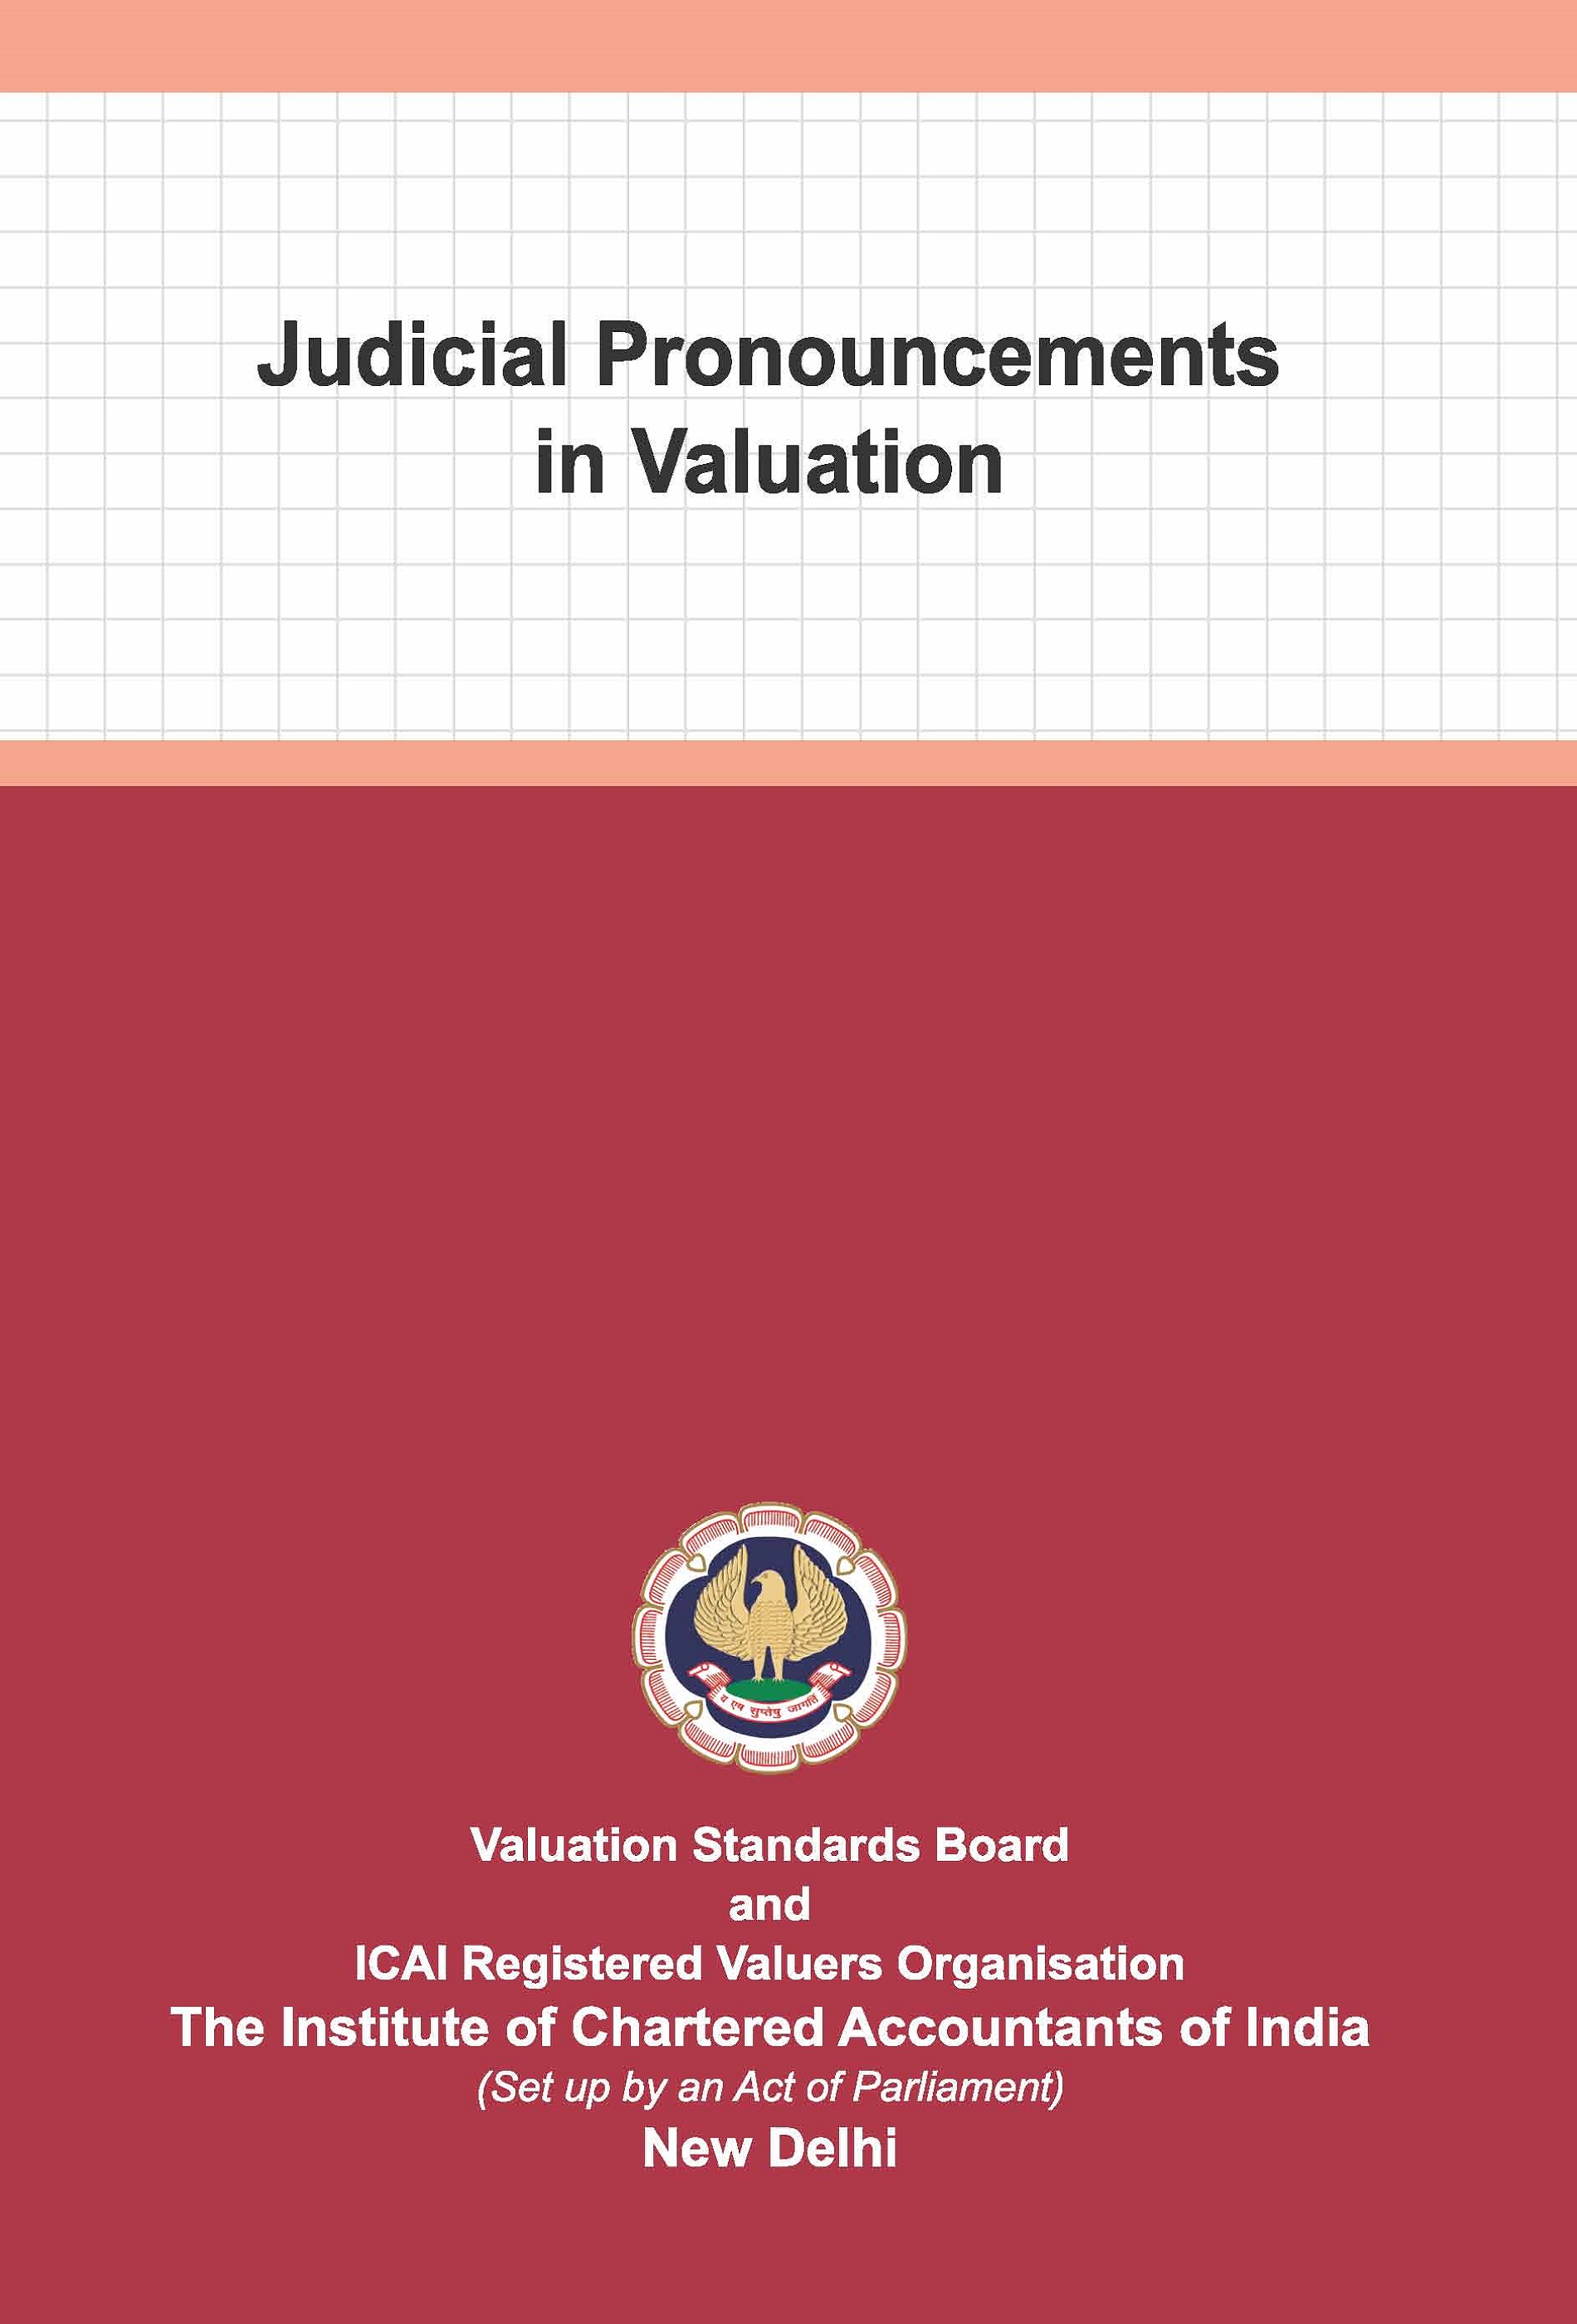 Judicial Pronouncements in Valuation (February, 2022)